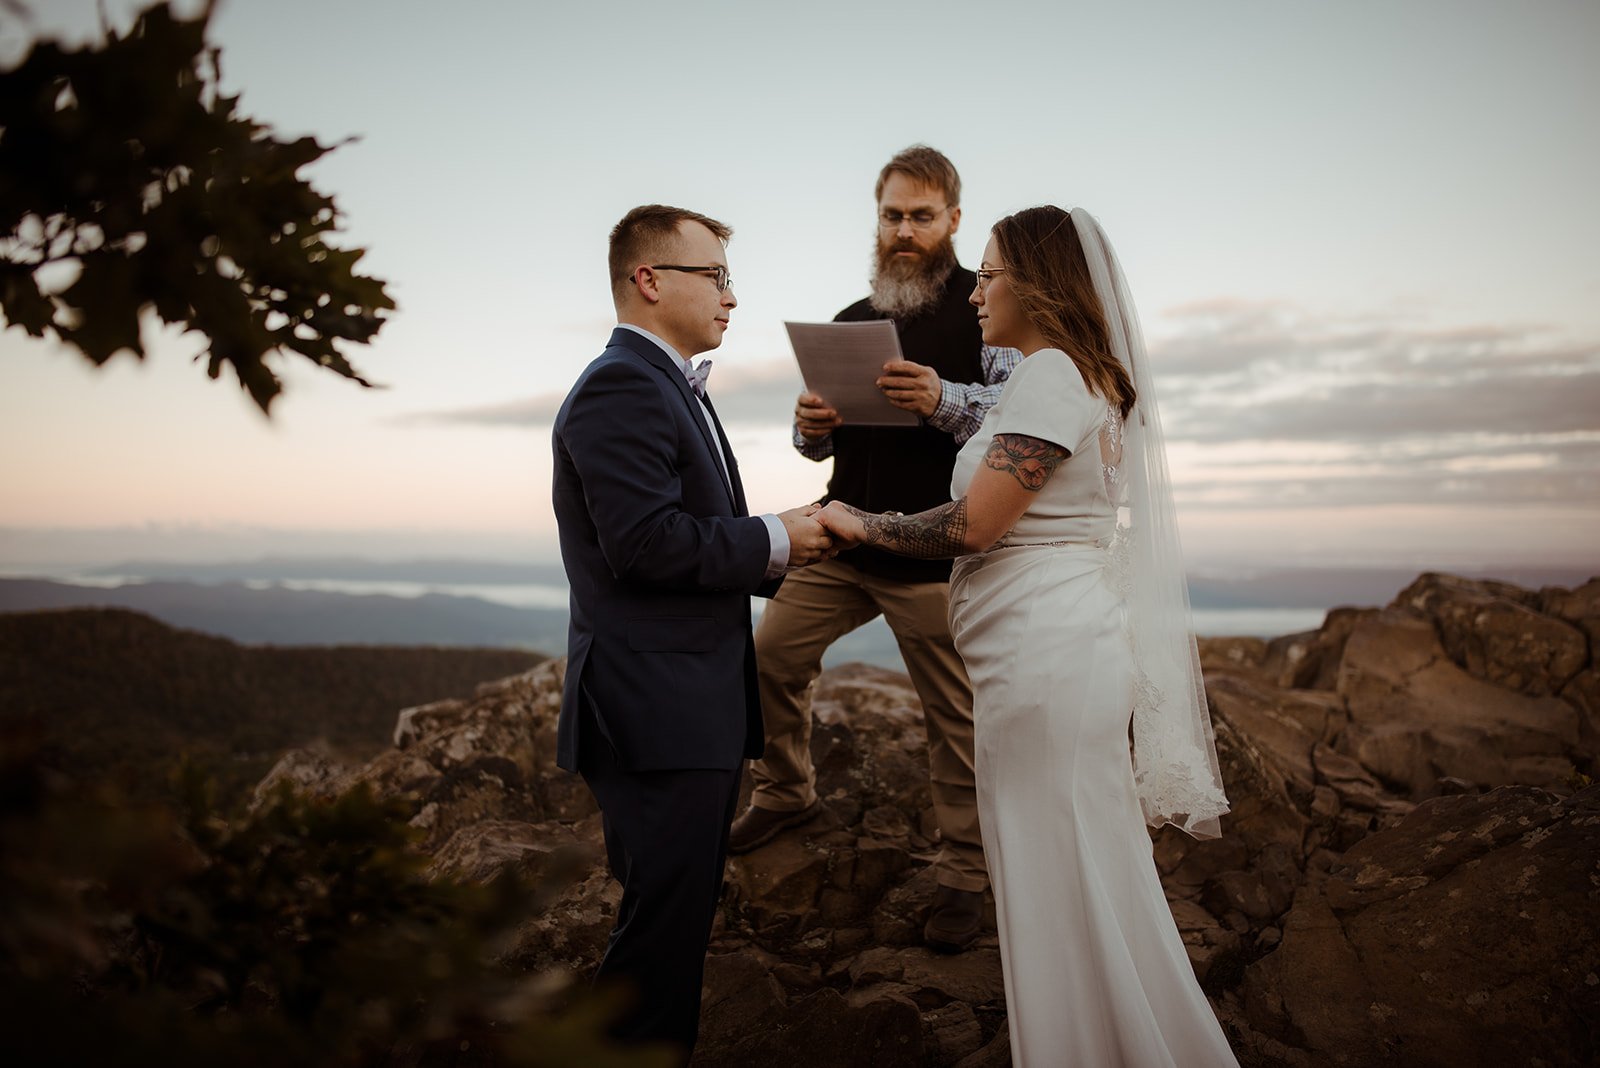 Shenandoah National Park Hiking Elopement with Guests - White Sails Creative_31.jpg